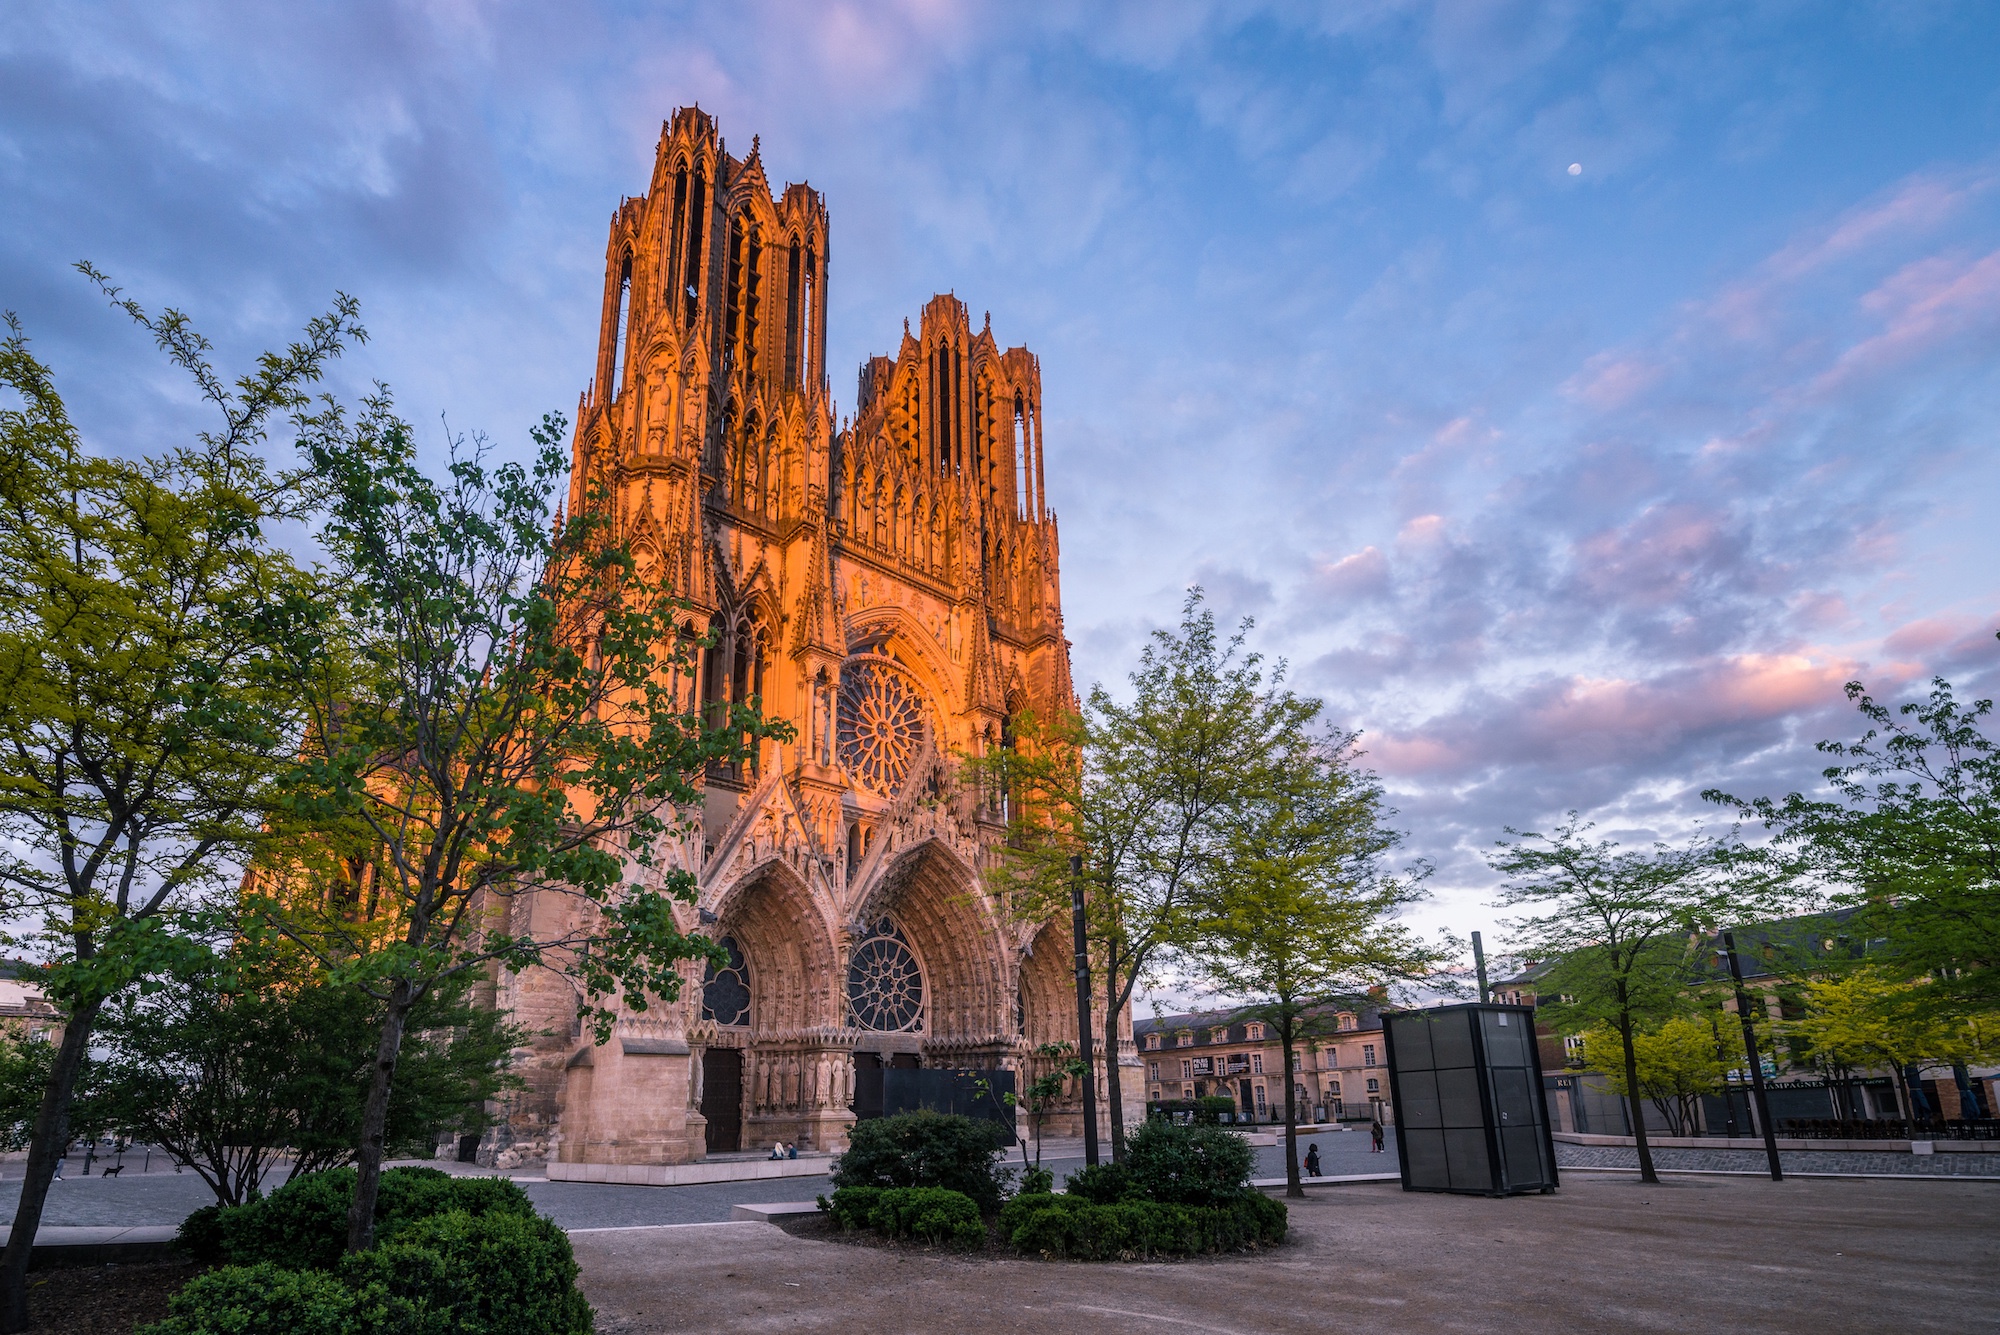 Reims cathedral in sunset light, France